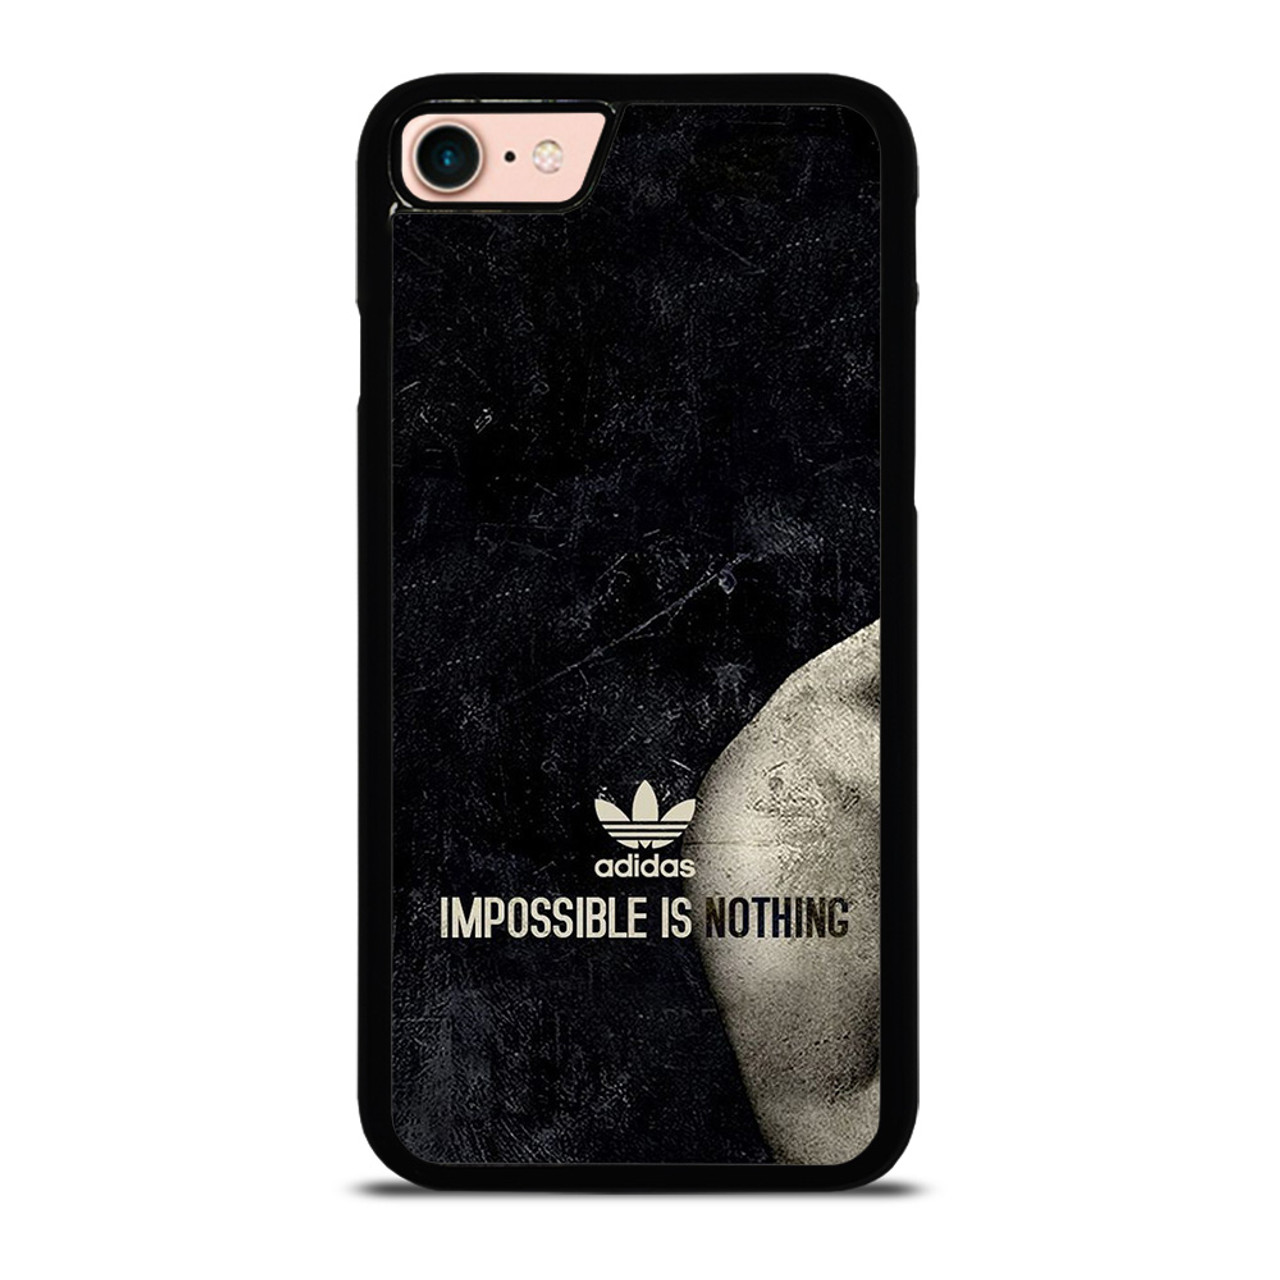 IMPOSSIBLE IS iPhone 8 Case Cover